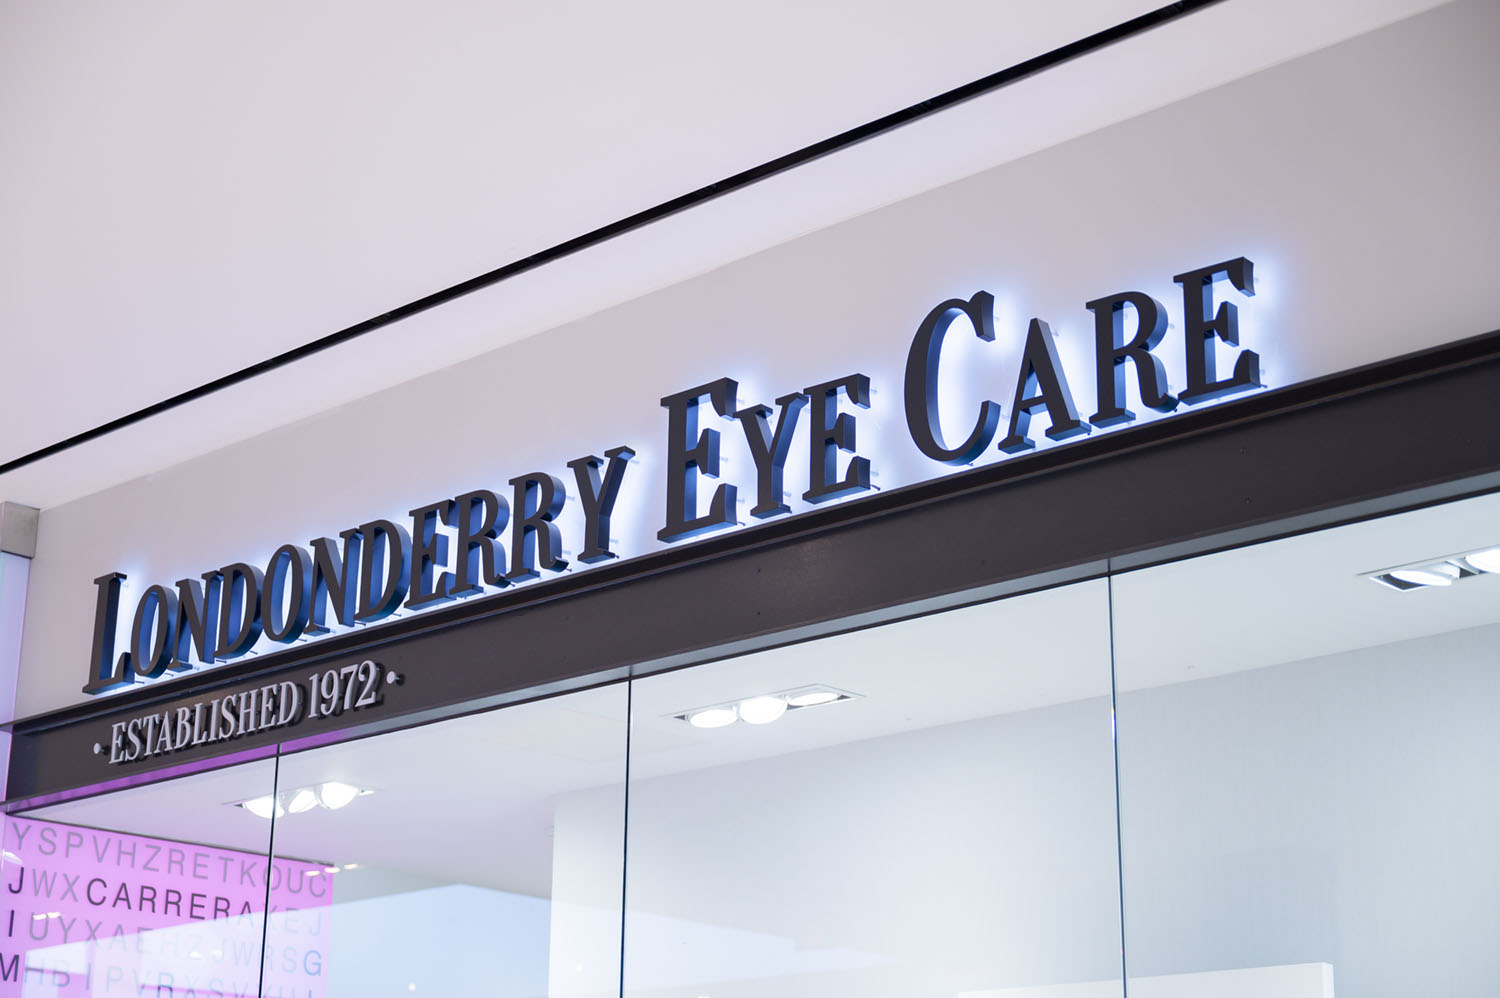 Store Sign | Londonderry Eye Care